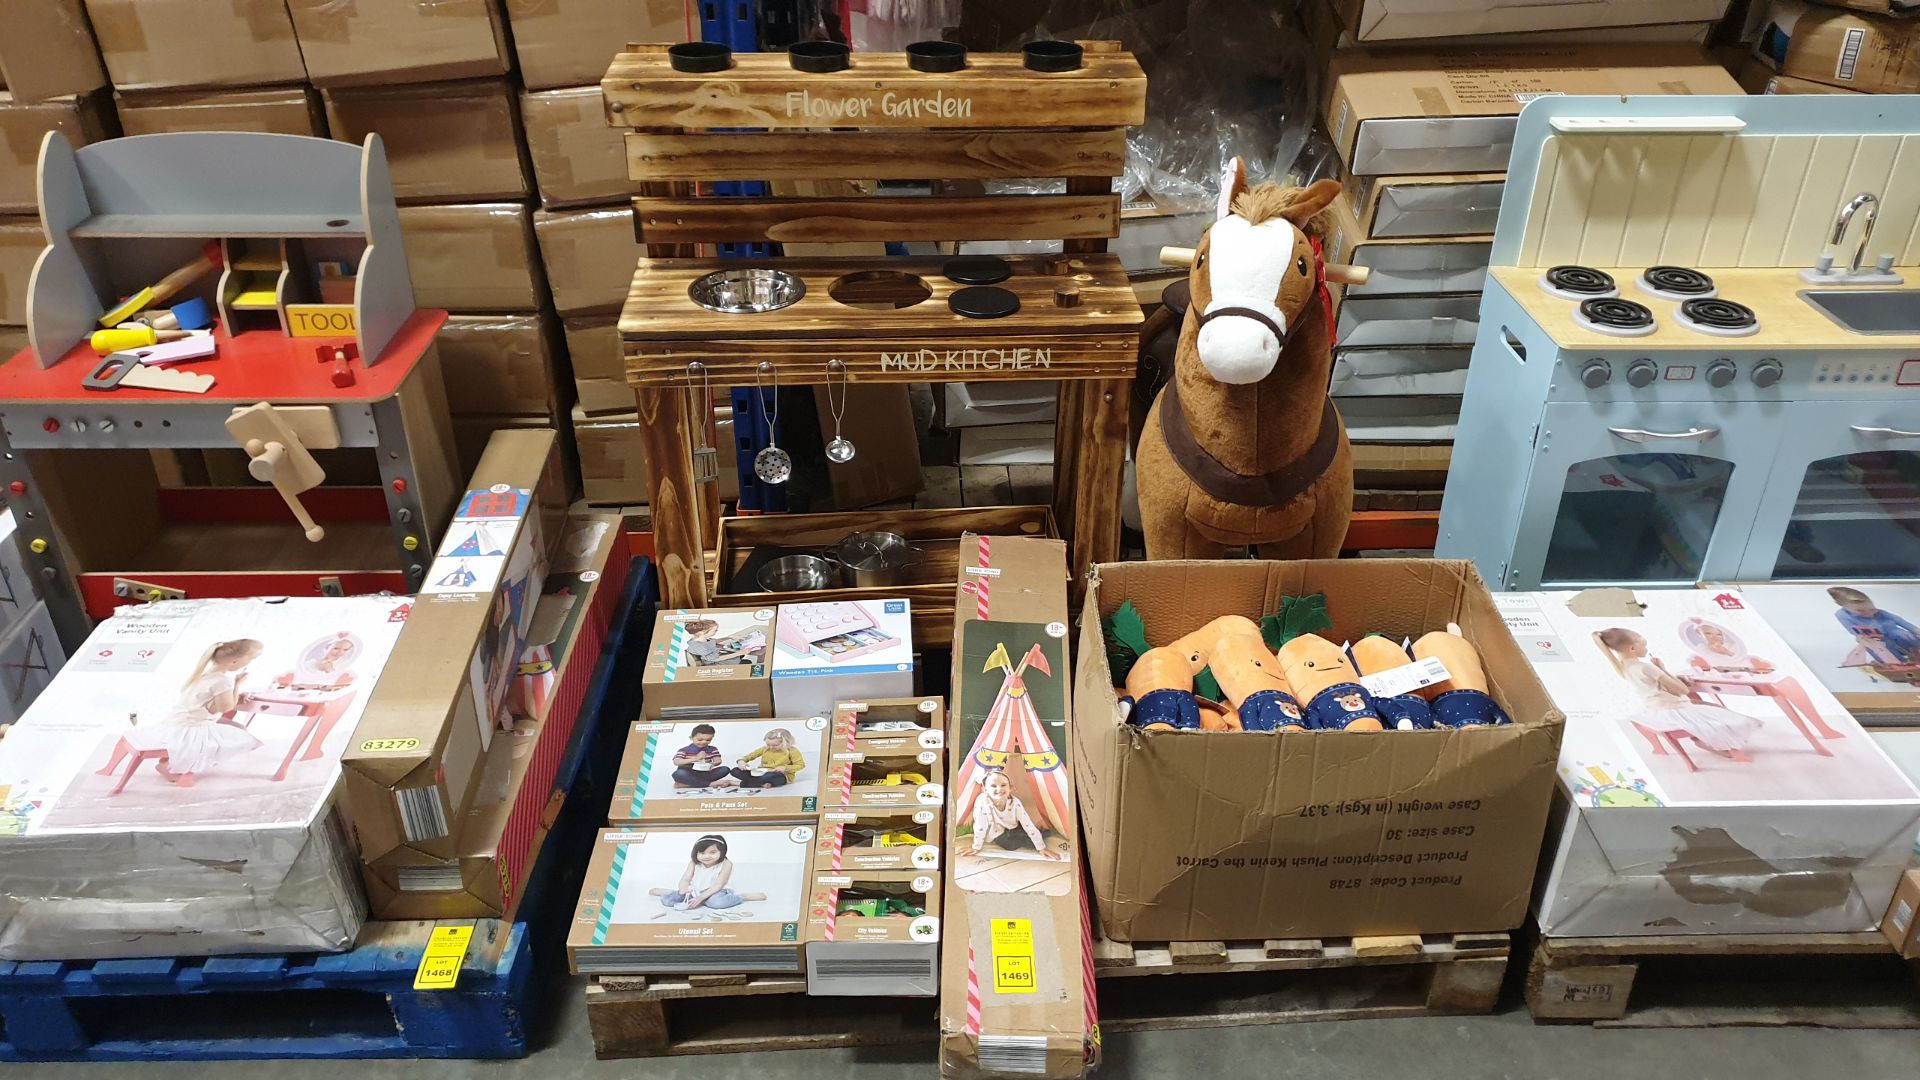 (LOT FOR THURSDAY 28TH MAY AUCTION) PALLET CONTAINING LITTLE TOWN (TIMELESS TOYS) IE WOODEN MUD